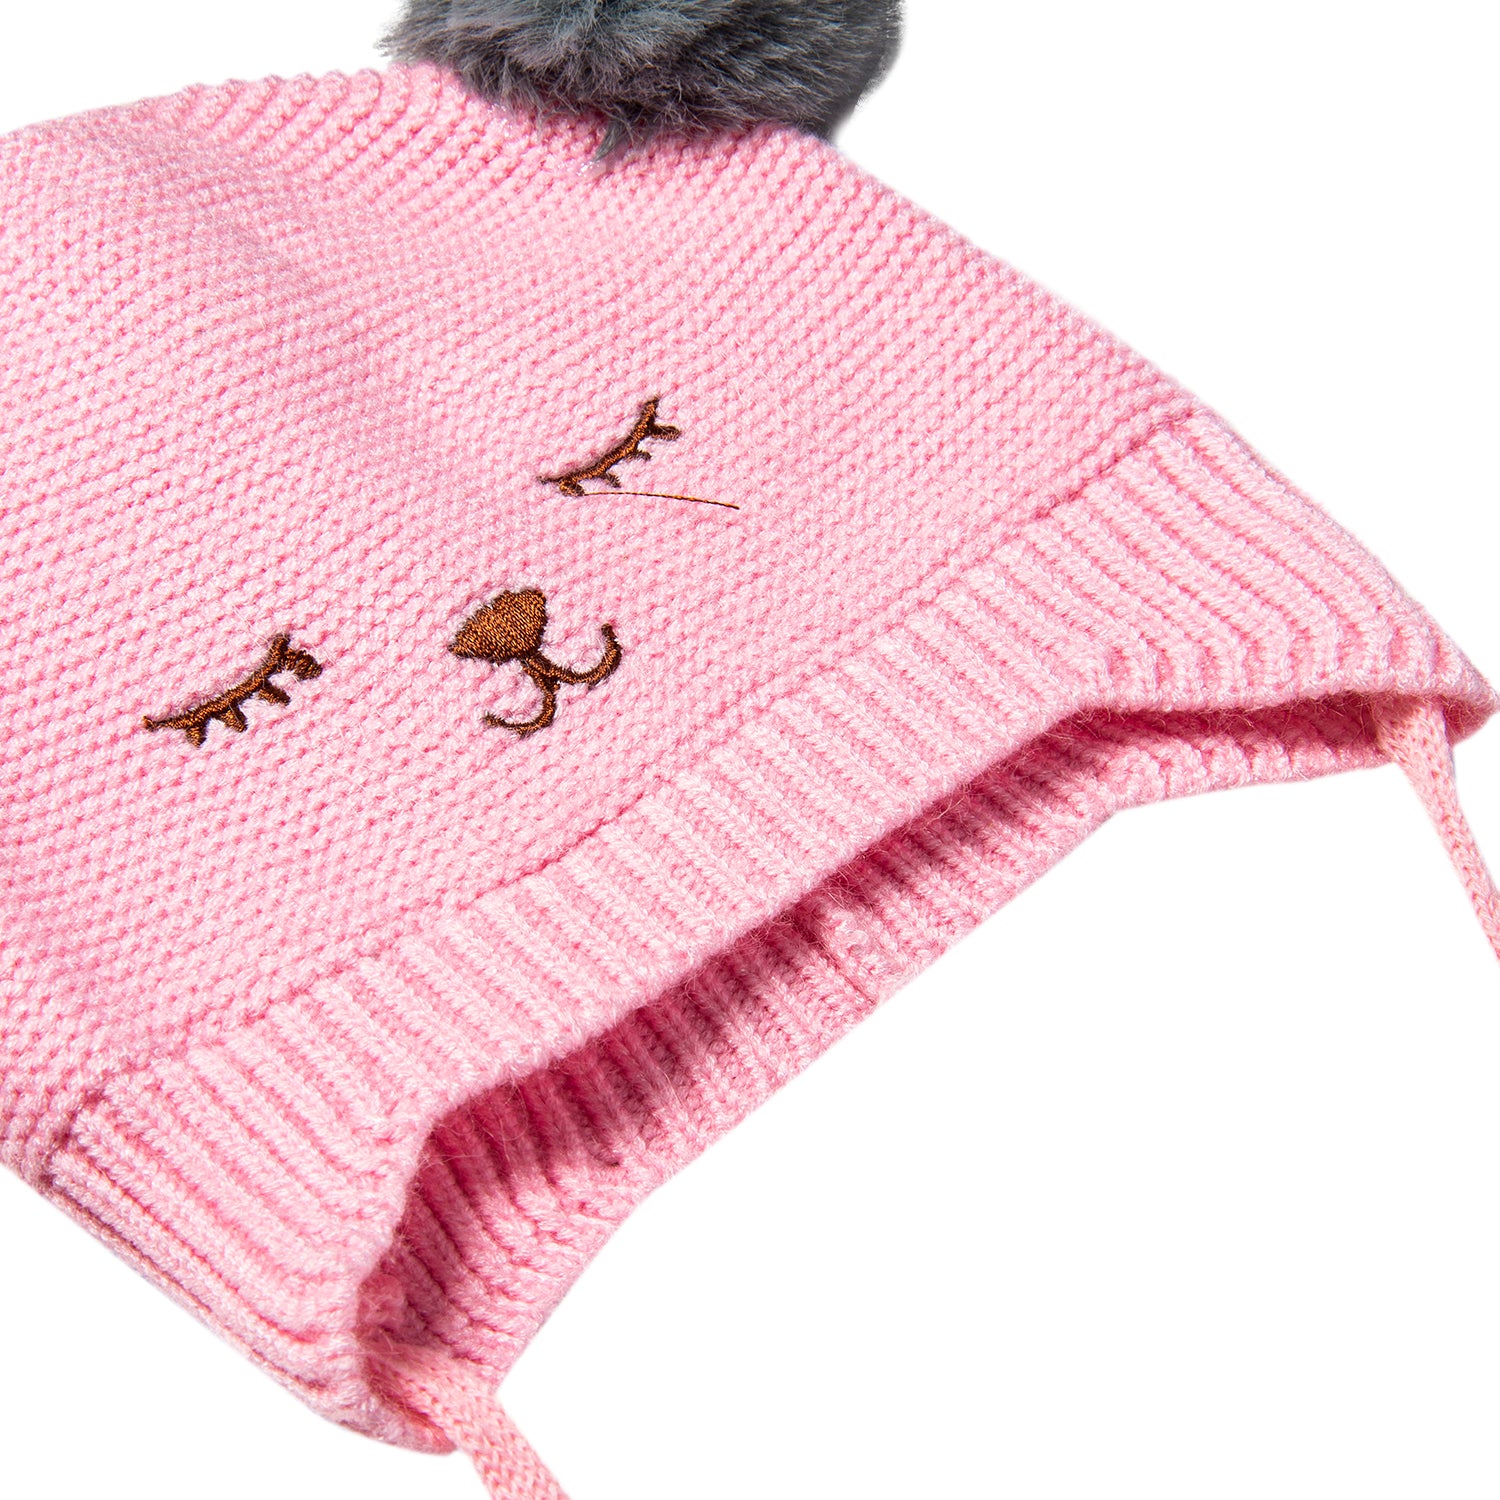 Knit Woollen Cap With Tie Knot For Ear Cover Sleeping Pom Pom Pink - Baby Moo